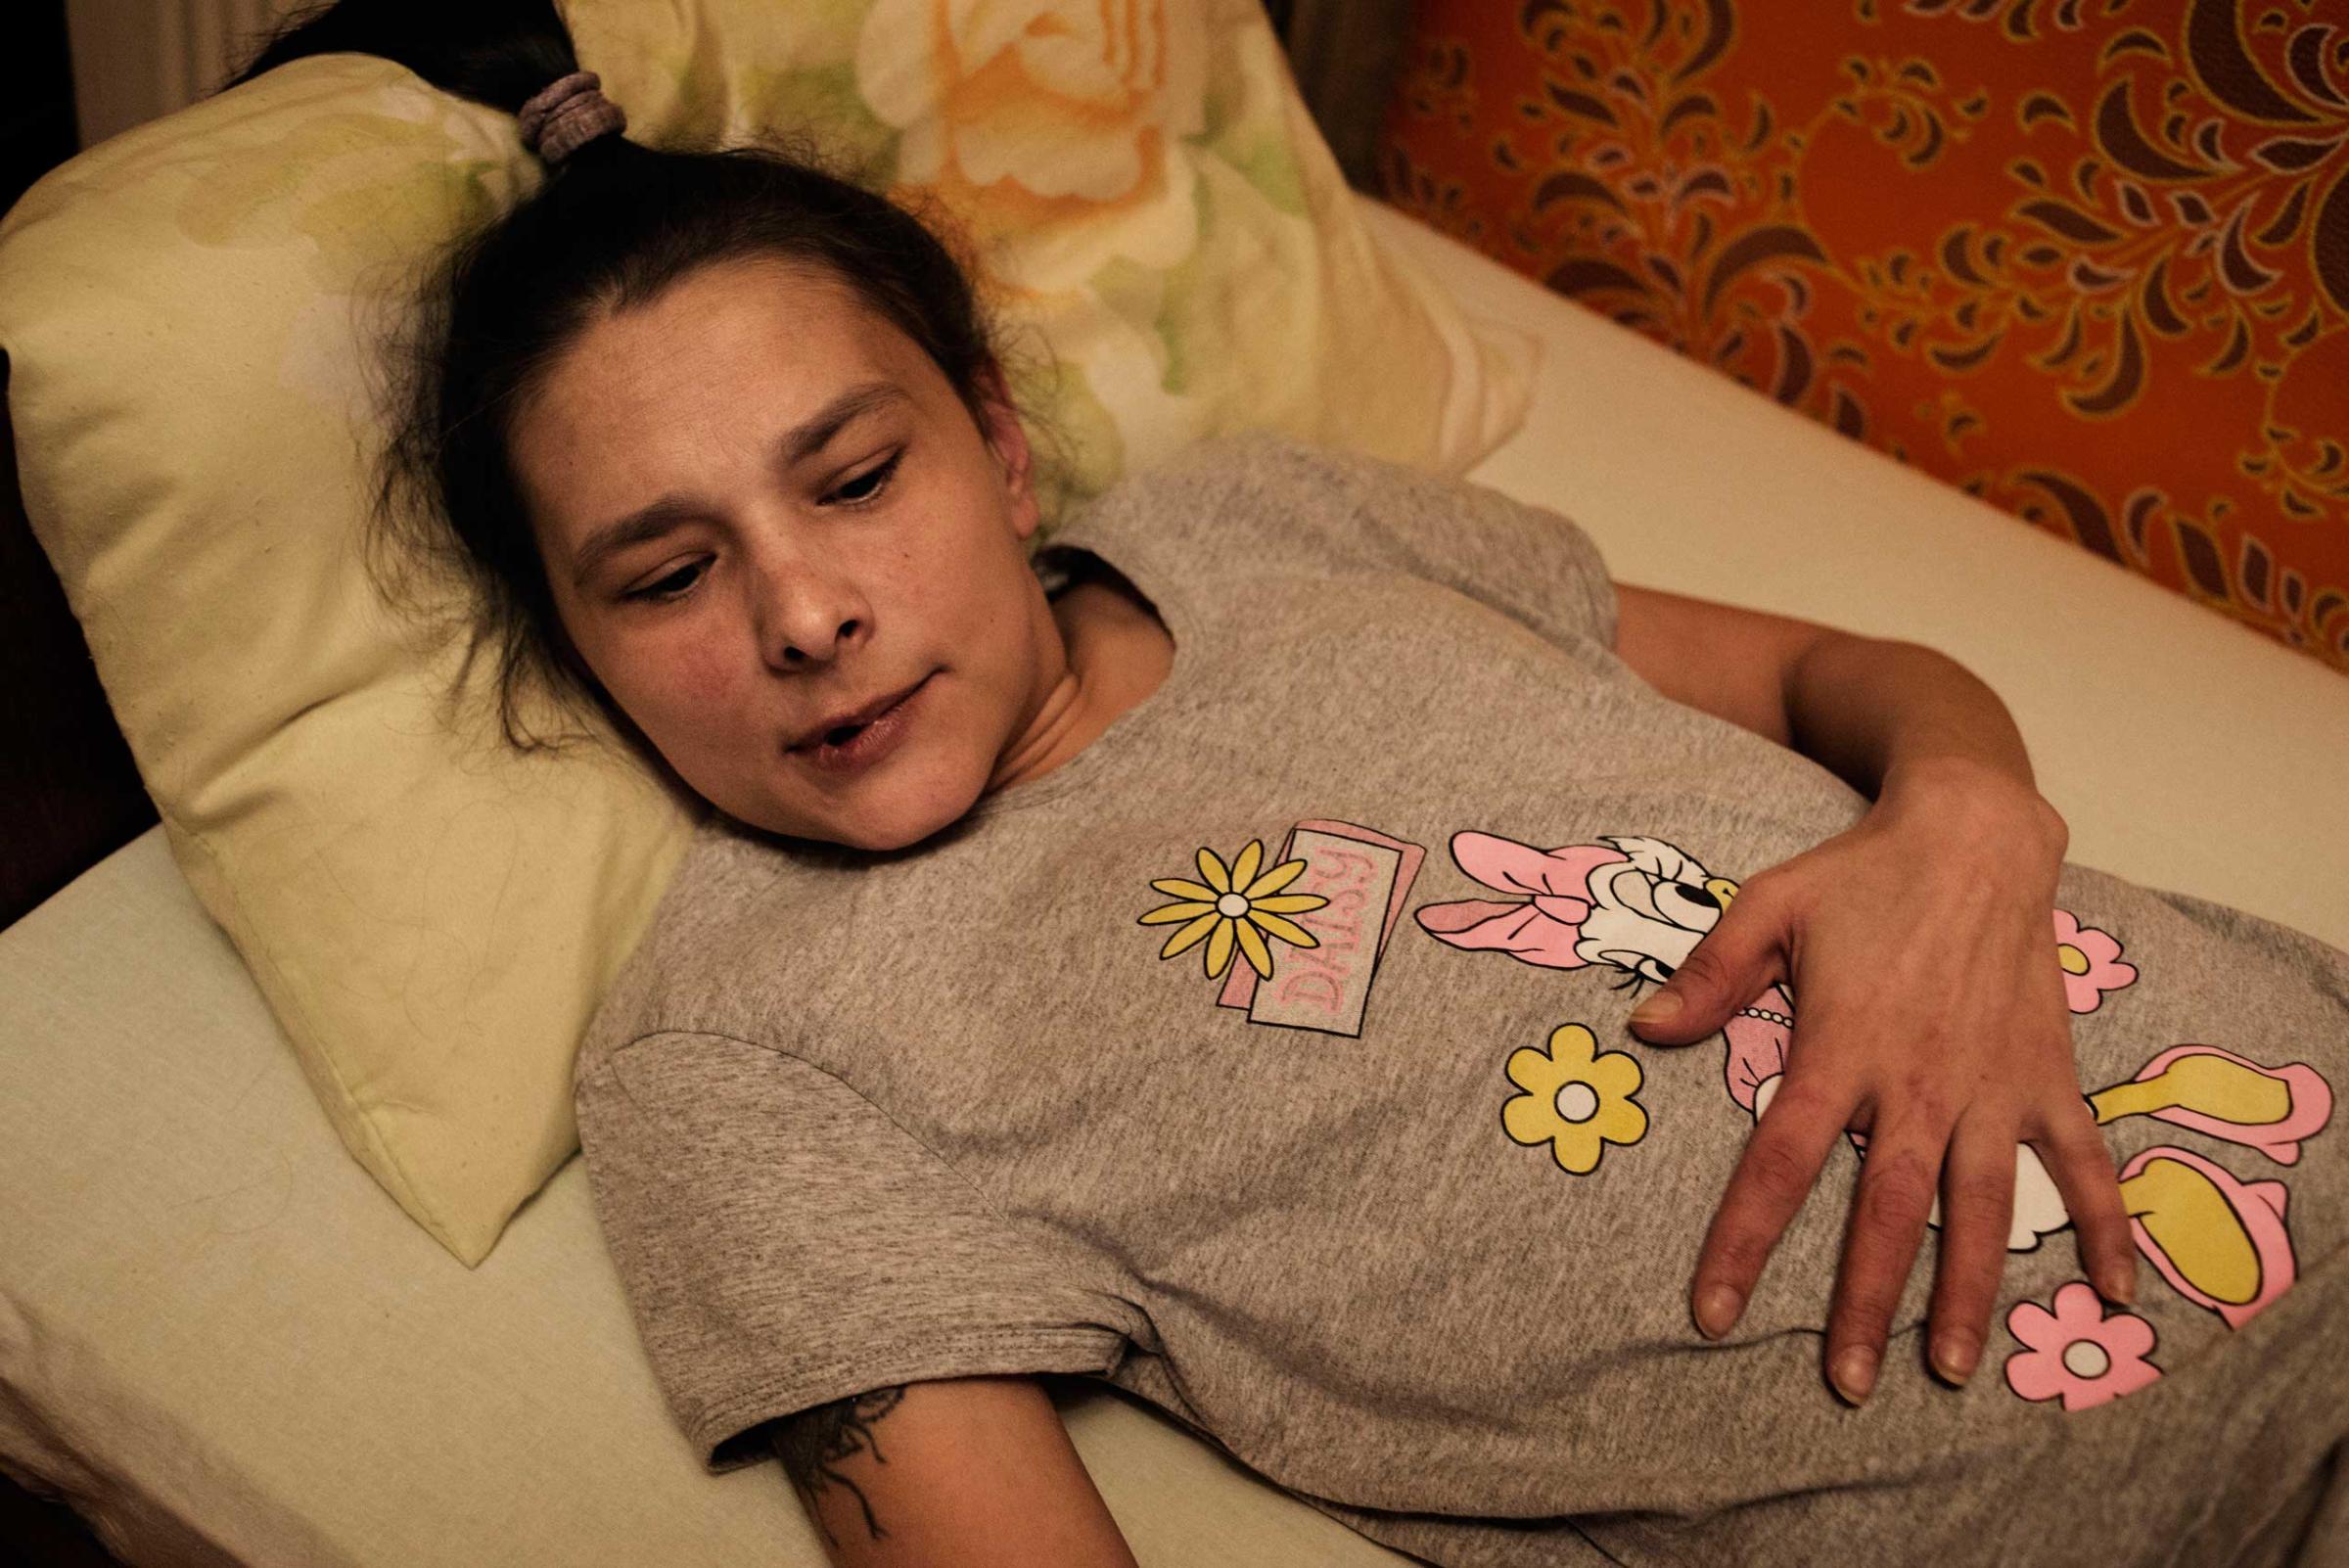 Oxana has been lying in bed for the past one year and half with her back permanently damaged. The high use of Krokodil damaged her mussels and her spine. Despite several surgeries she can't seat or stand. Her condition has also been worsened by her father's beatings who couldn't cope with her constant request for money to buy drug.